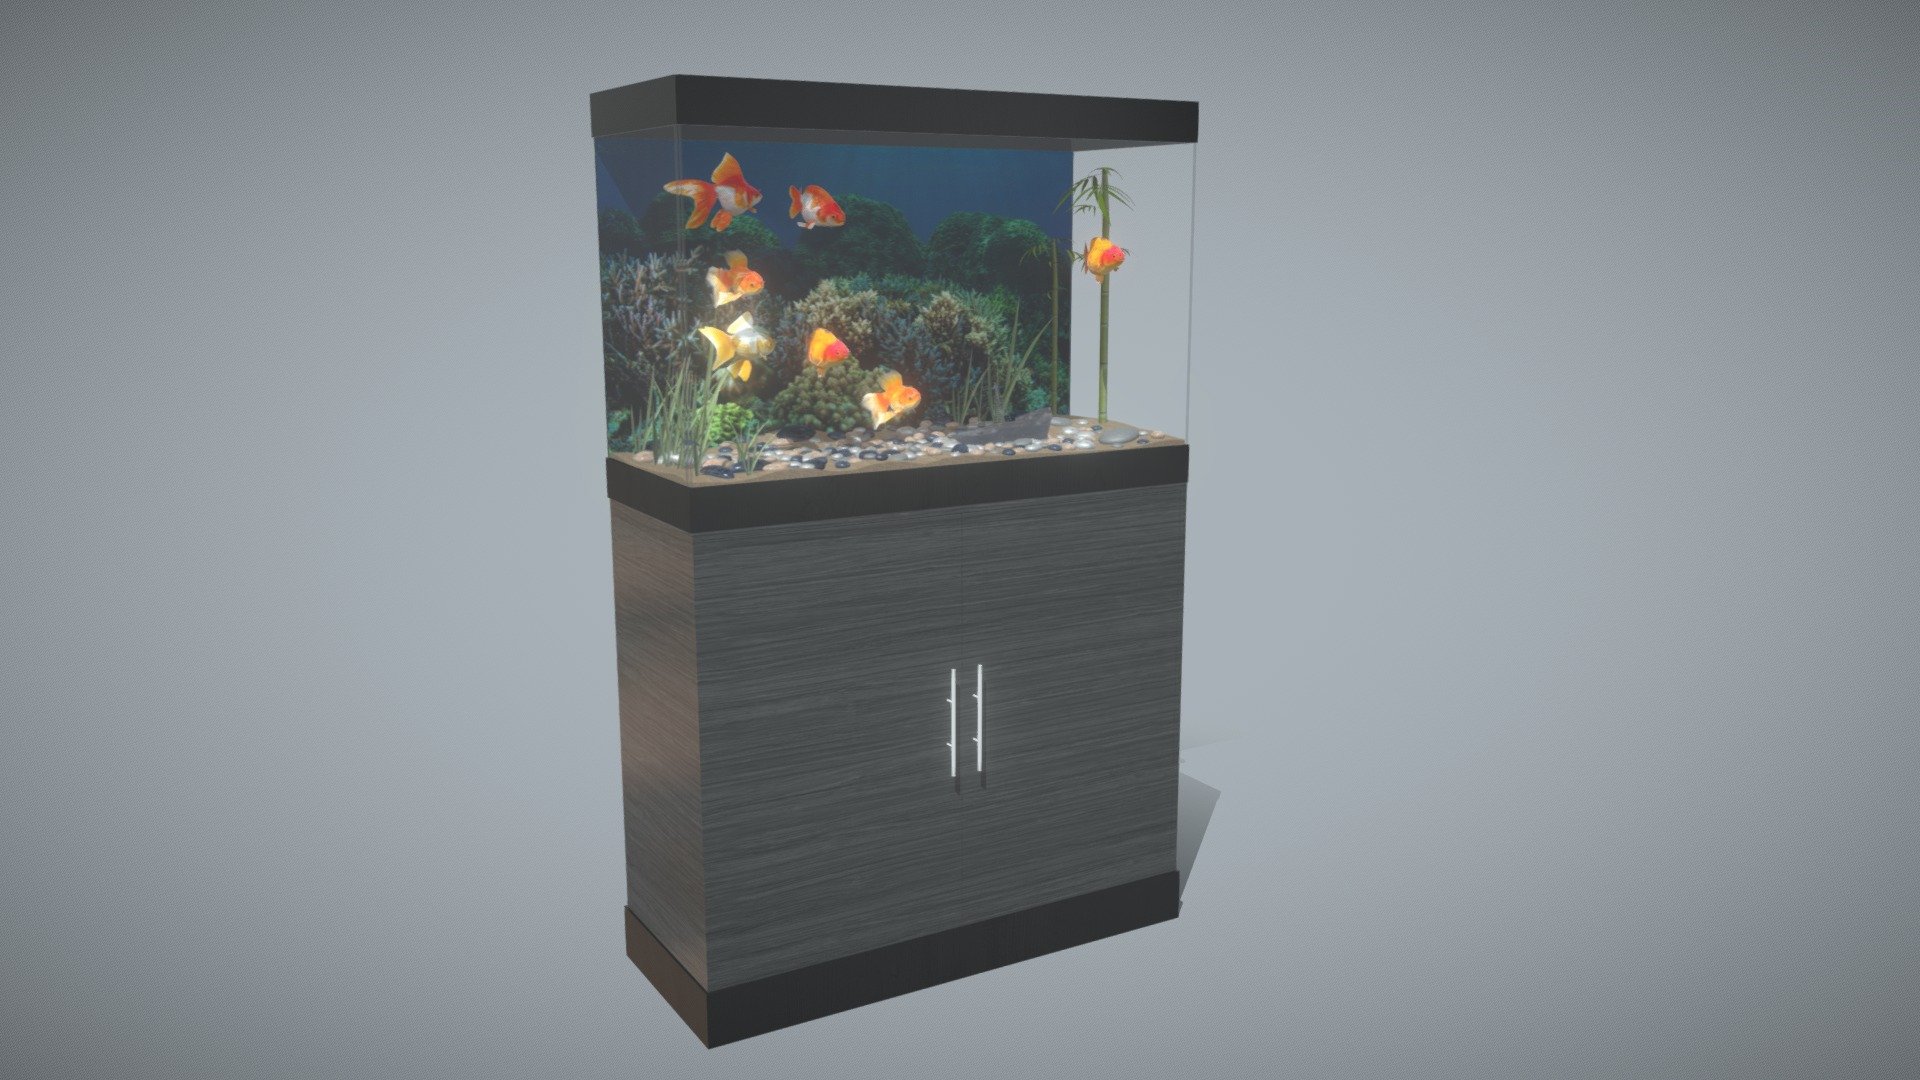 This aquarium furniture model has 5 varieties of high quality animated goldfish. 
It is made for interior design , architectural vizualisation, animation film,  virtual production scene, game levels &hellip;

Aquarium Fourniture contains:
- 5  variety of hight quality animated goldfish
- 4k sized textures (Base color, Roughness, Specular, Normal map, Bump Map and translucent)

Mores informations at:  picasty@gmail.com - Aquarium Furniture_Model01 - Buy Royalty Free 3D model by Picasty 3d model